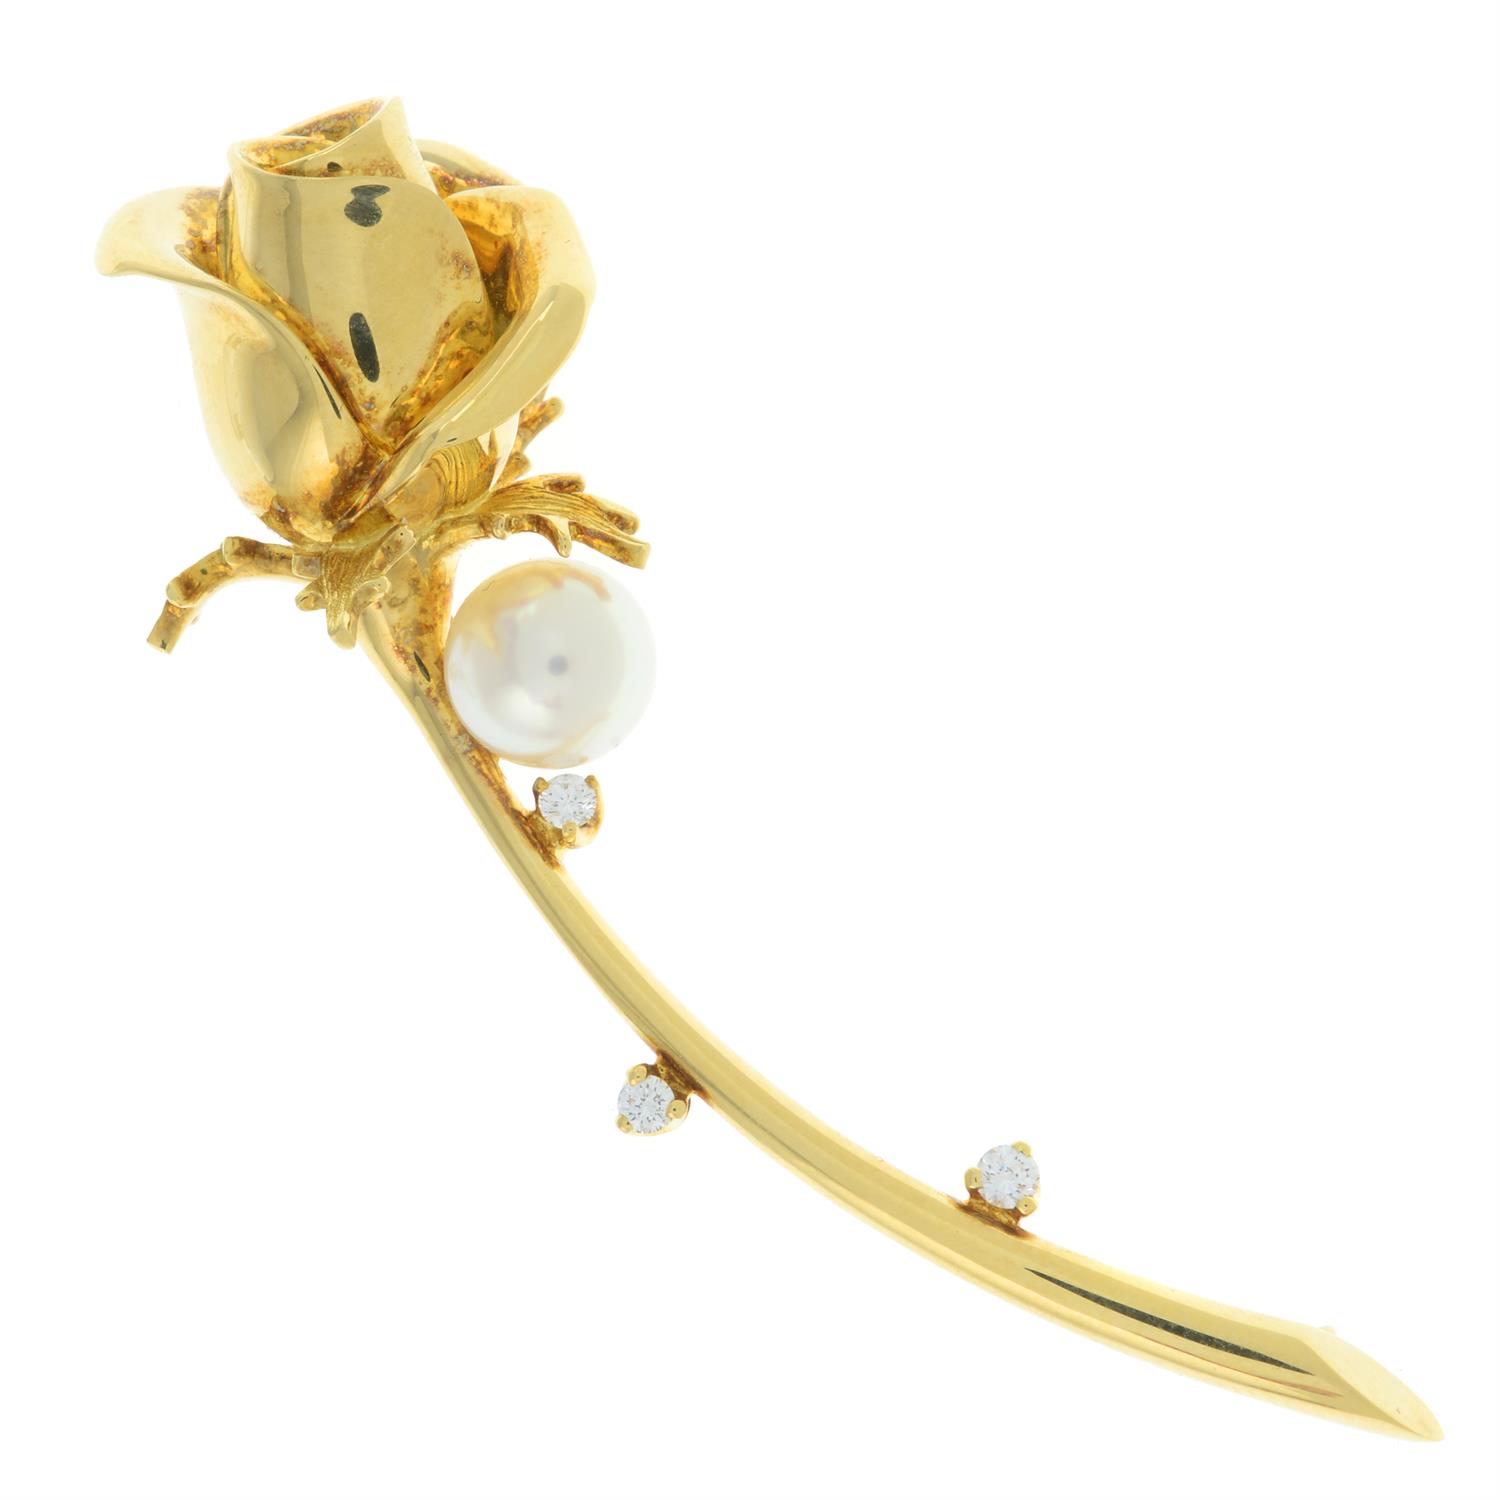 Cultured pearl and diamond rose brooch, by Mikimoto - Image 2 of 5